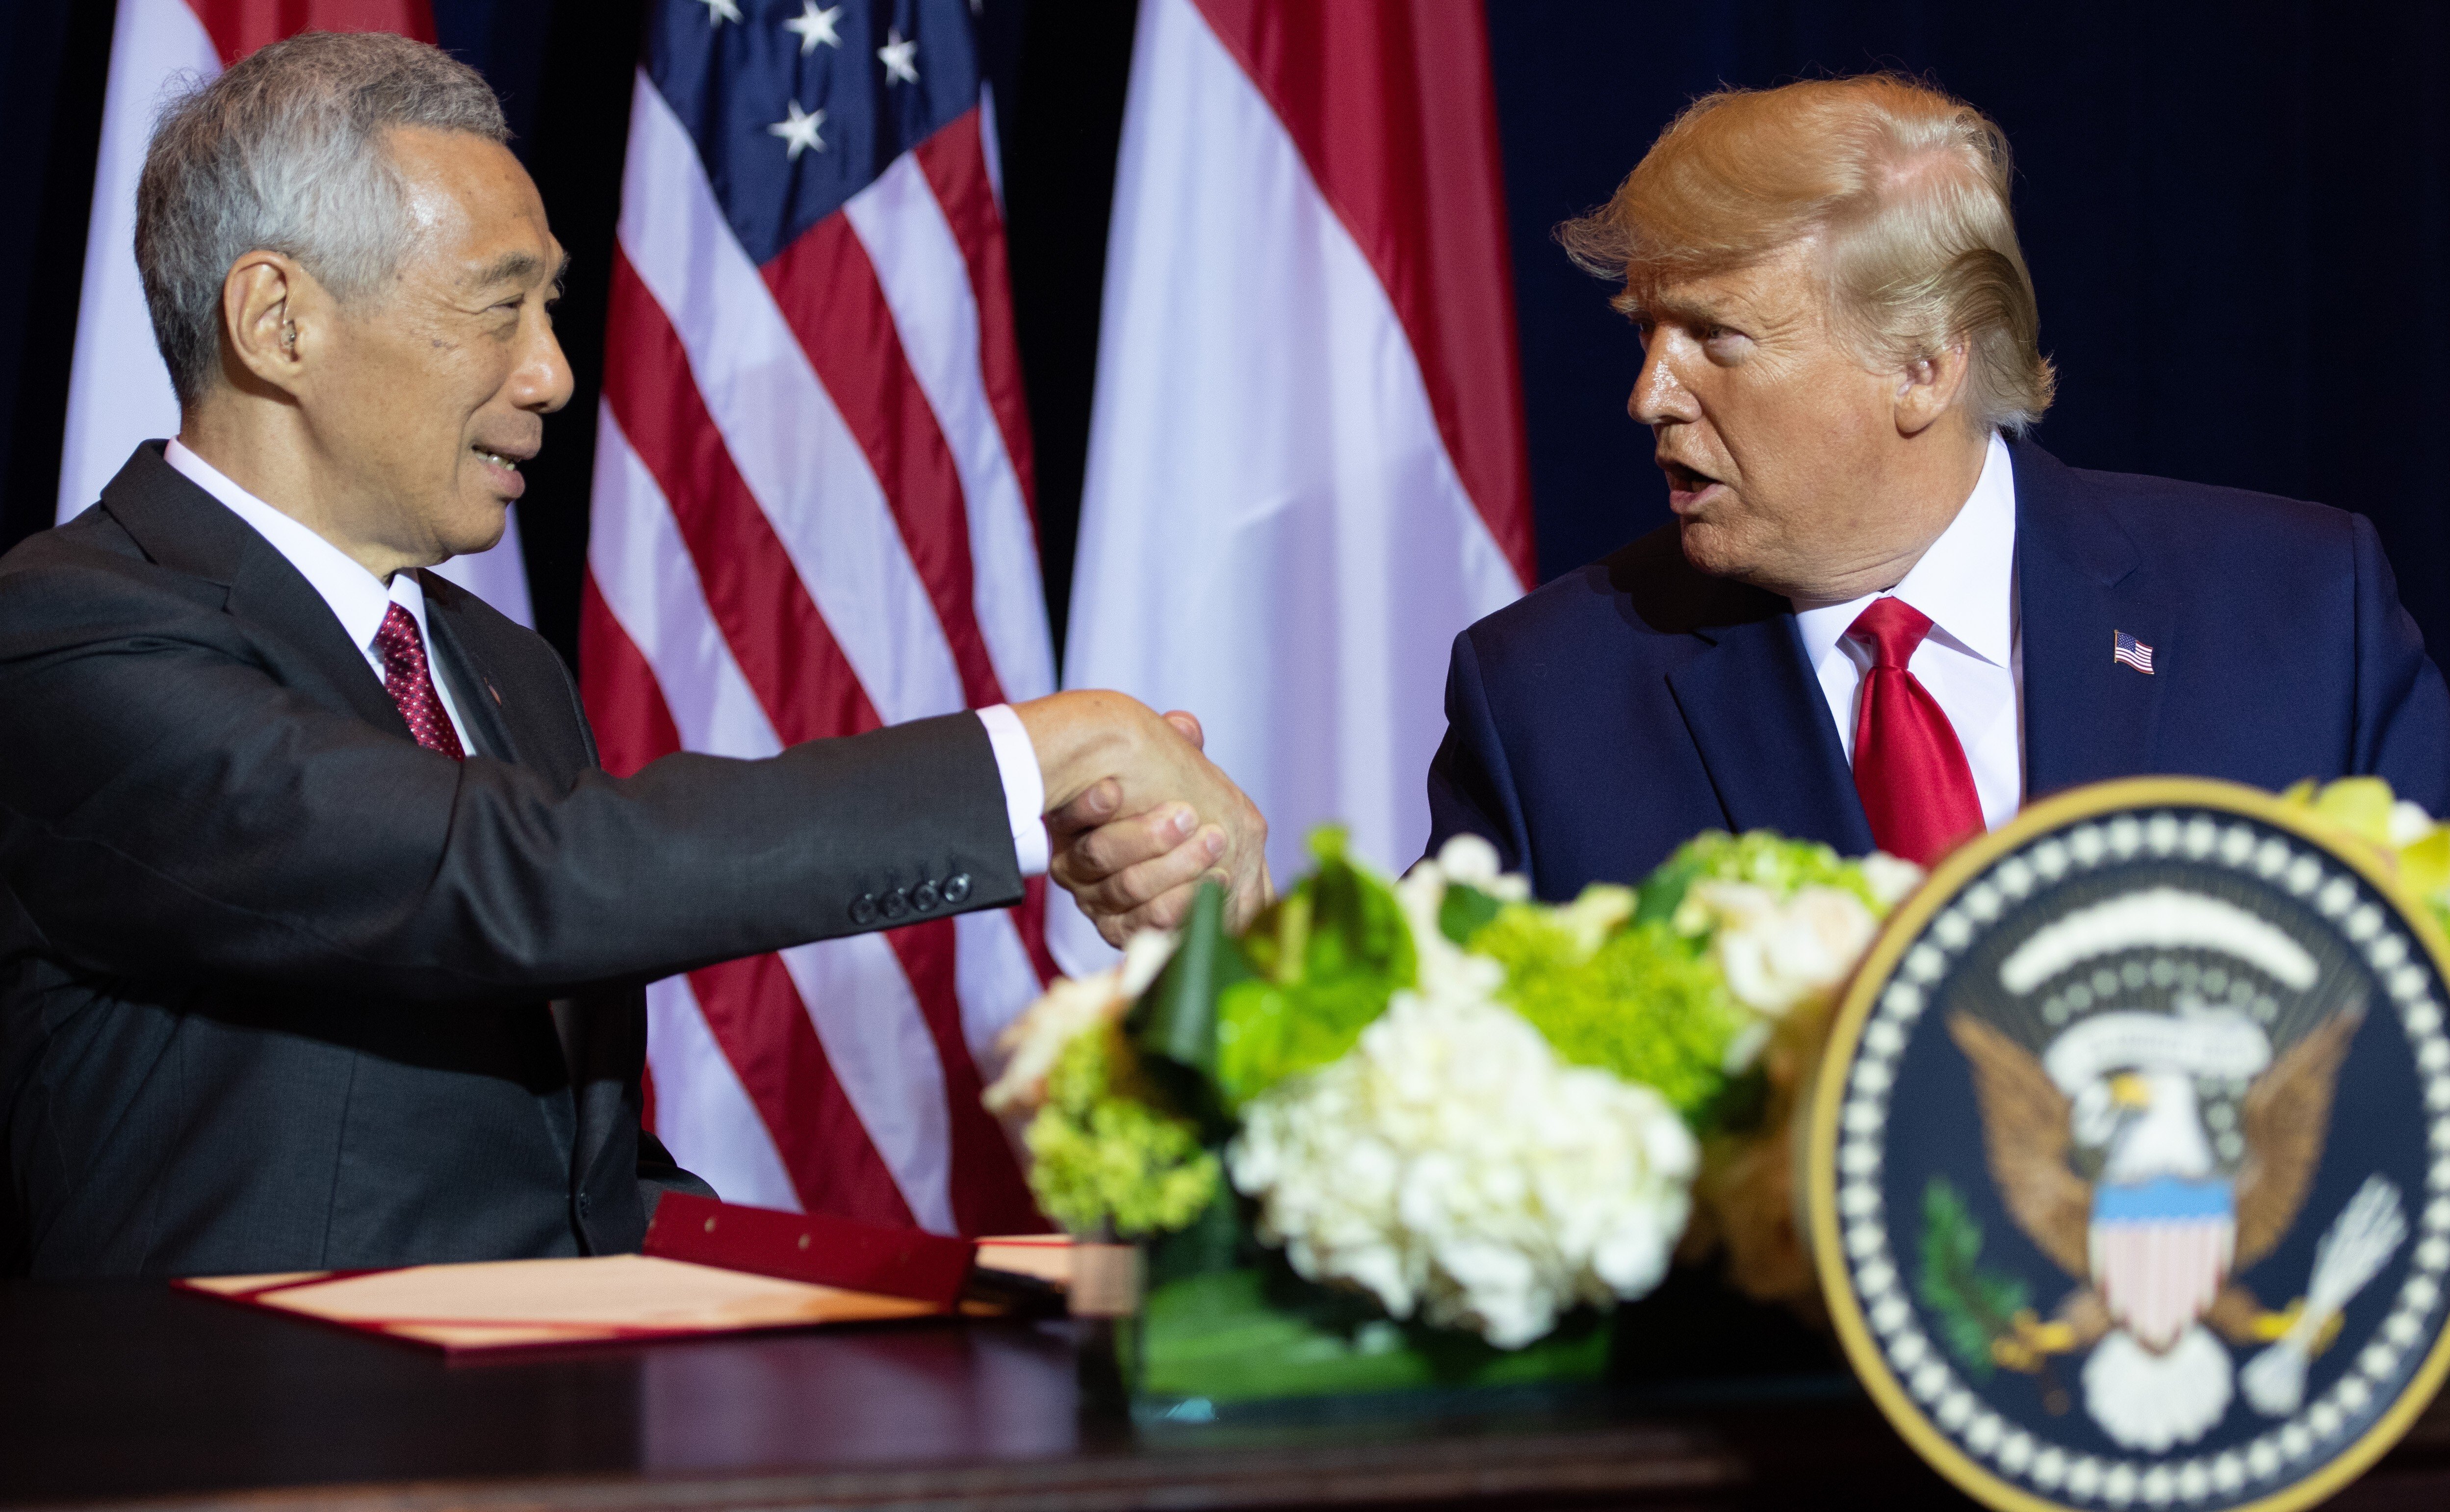 US President Donald Trump shakes hands with Prime Minister Lee Hsien Loong of Singapore at the UN in September 2019, one of the few times he has met with the leader of an Asean nation. Photo: AFP